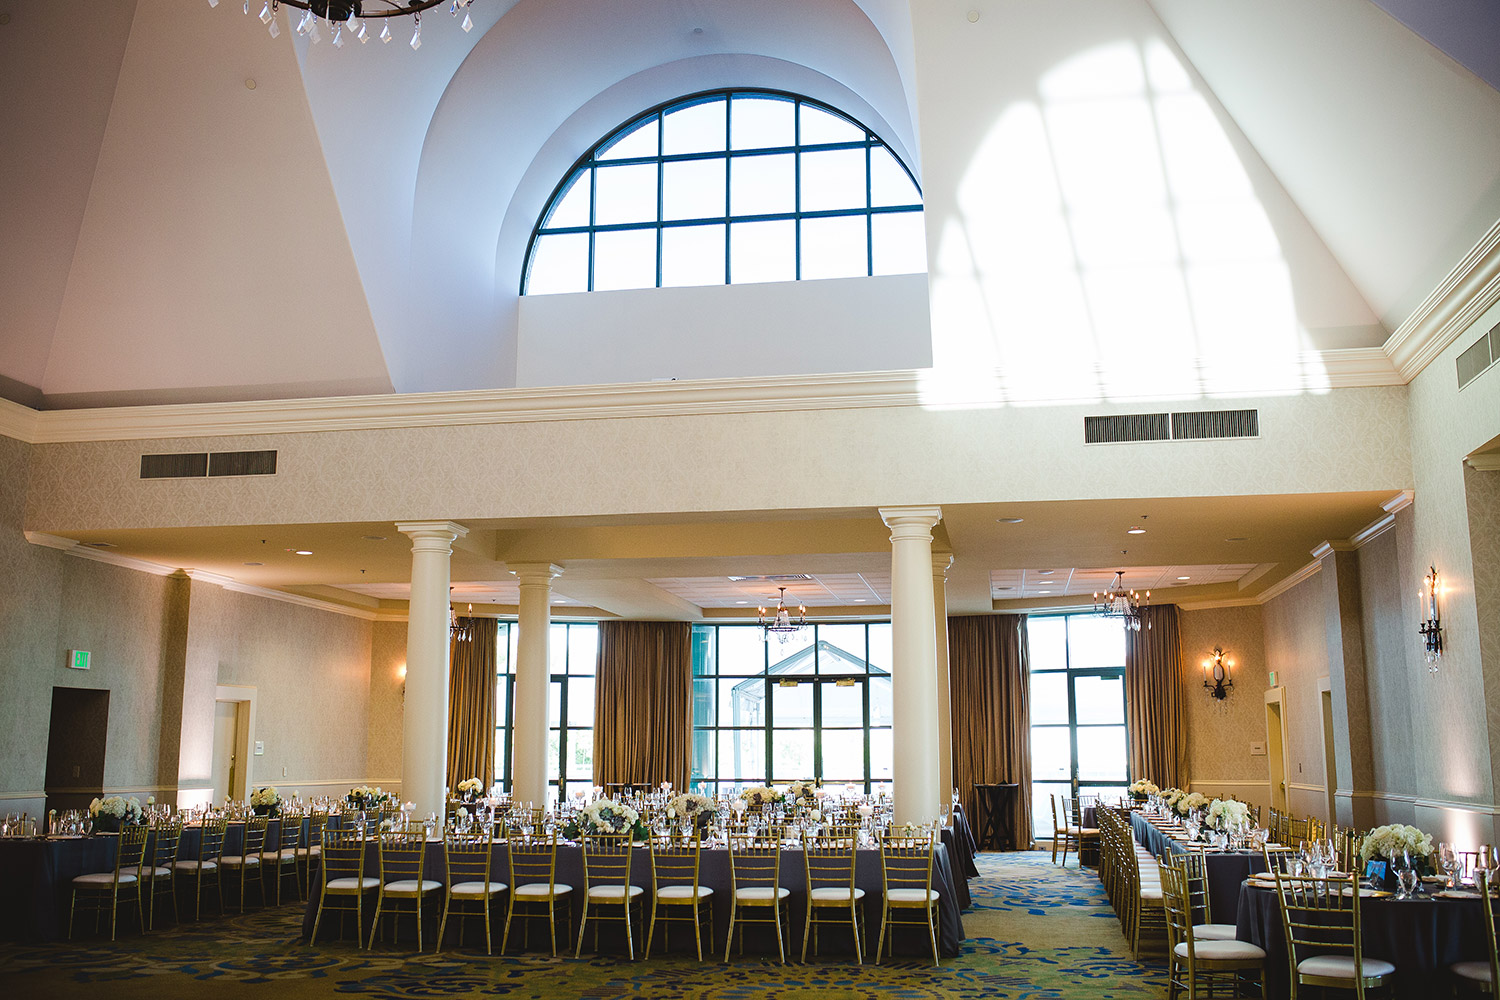 River Crest Country Club interior ballroom reception with tall arched ceilings